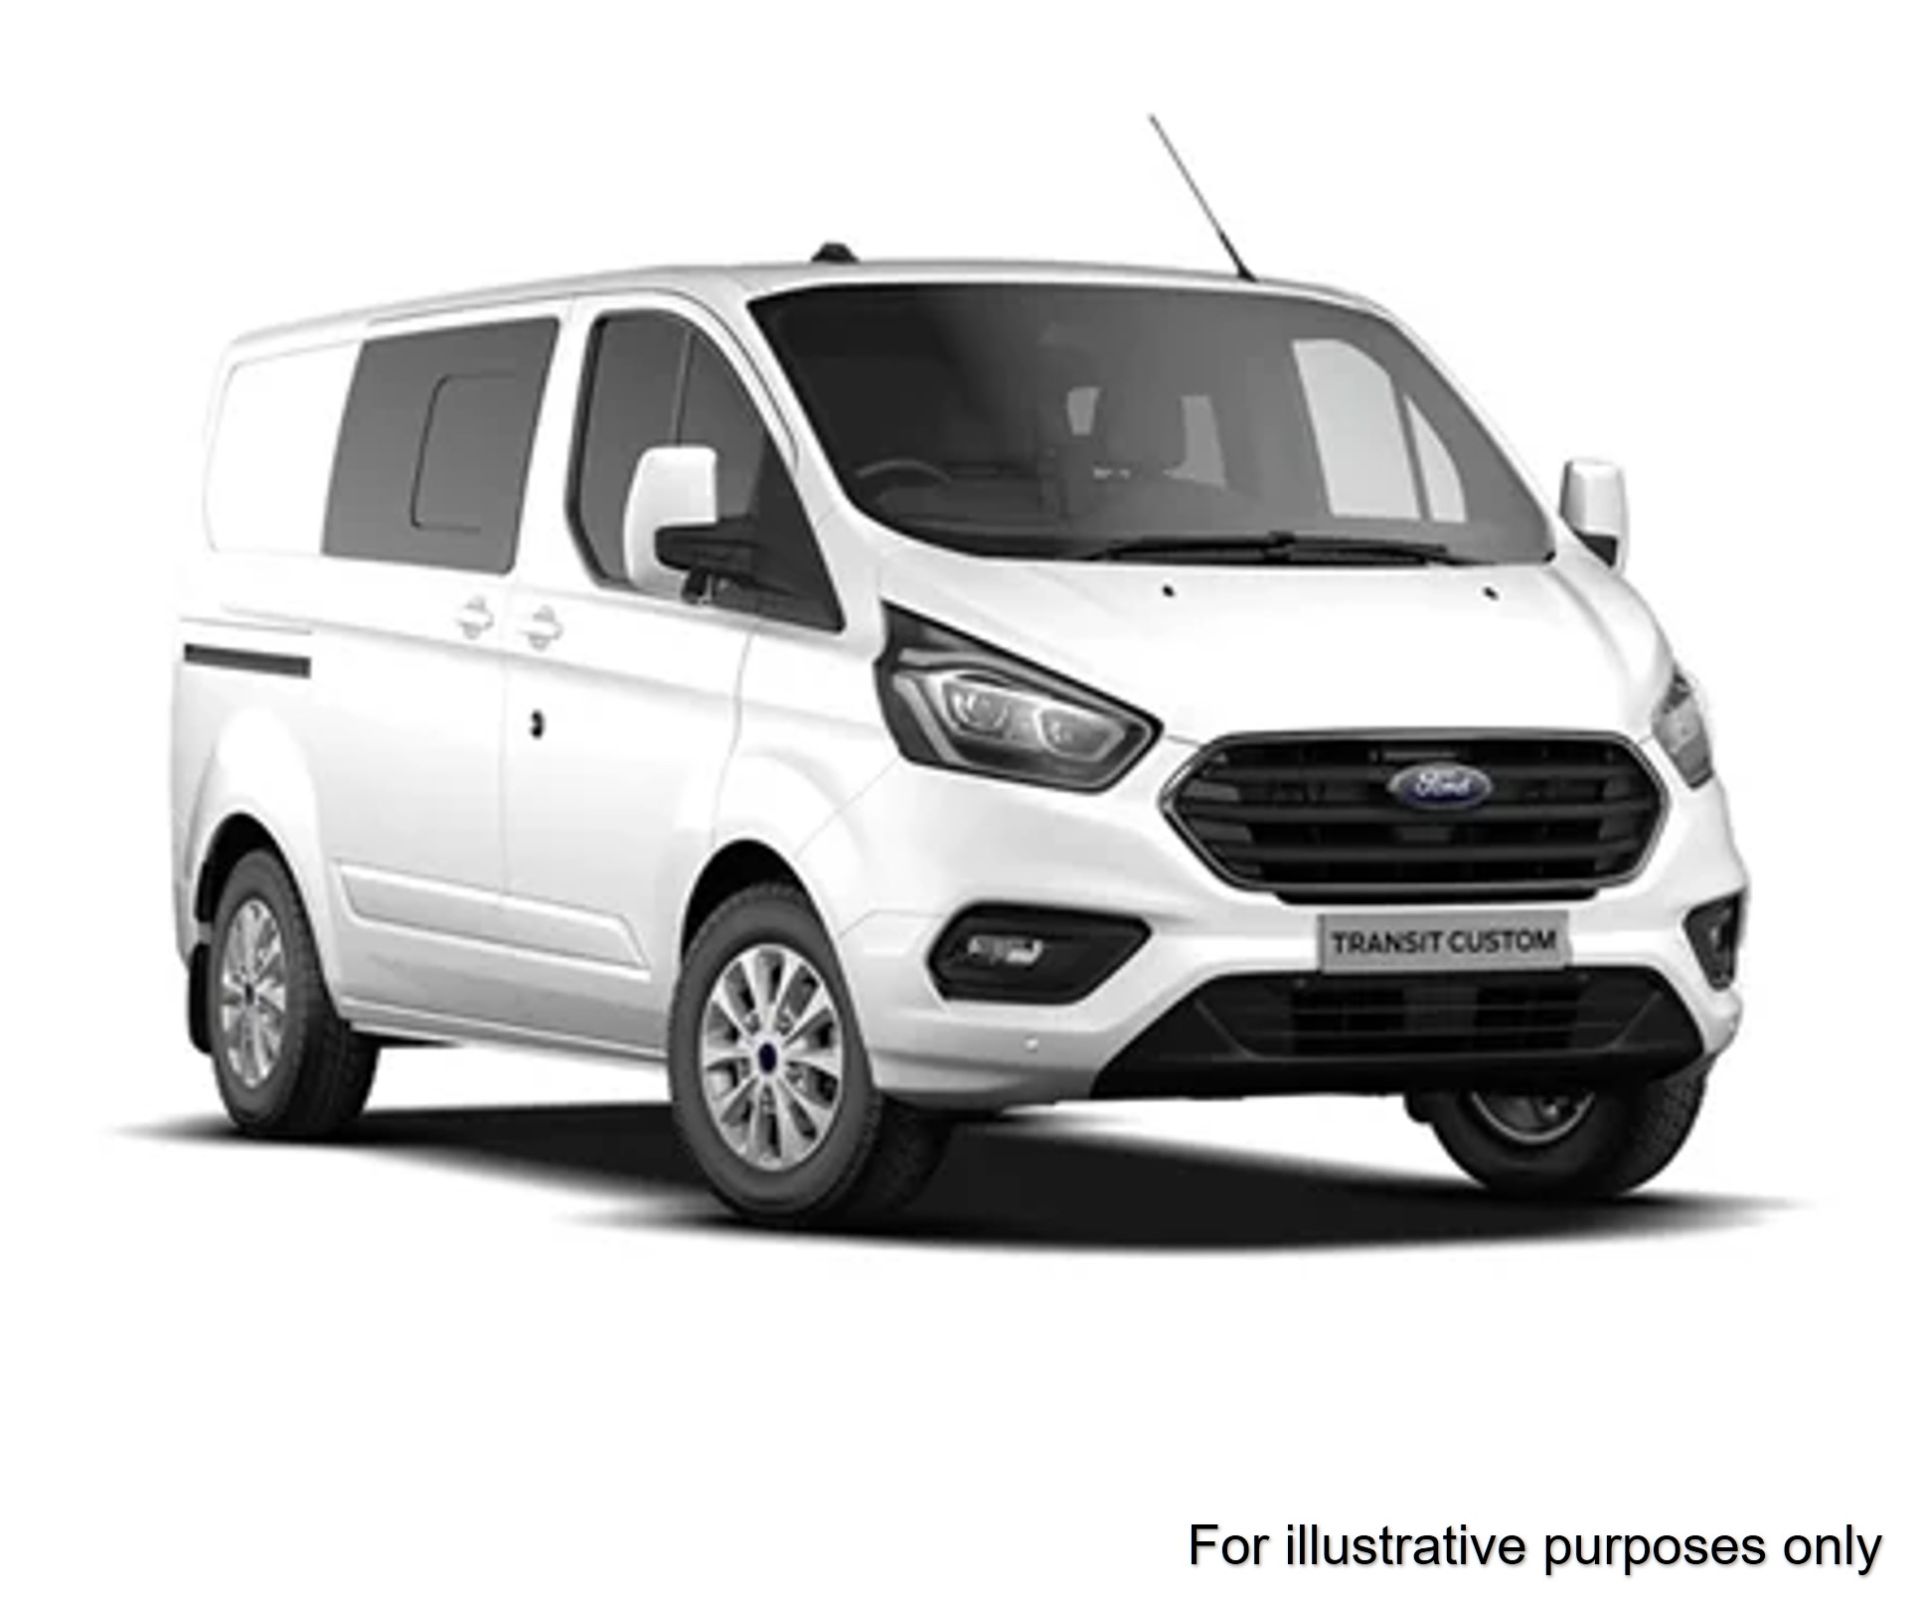 2019 Ford Transit Custom 300 L1 2.0ECOBLUE 105PS LOW ROOF DOUBLE CAB LEADER EURO 6 (FG69ZYC) Image 1